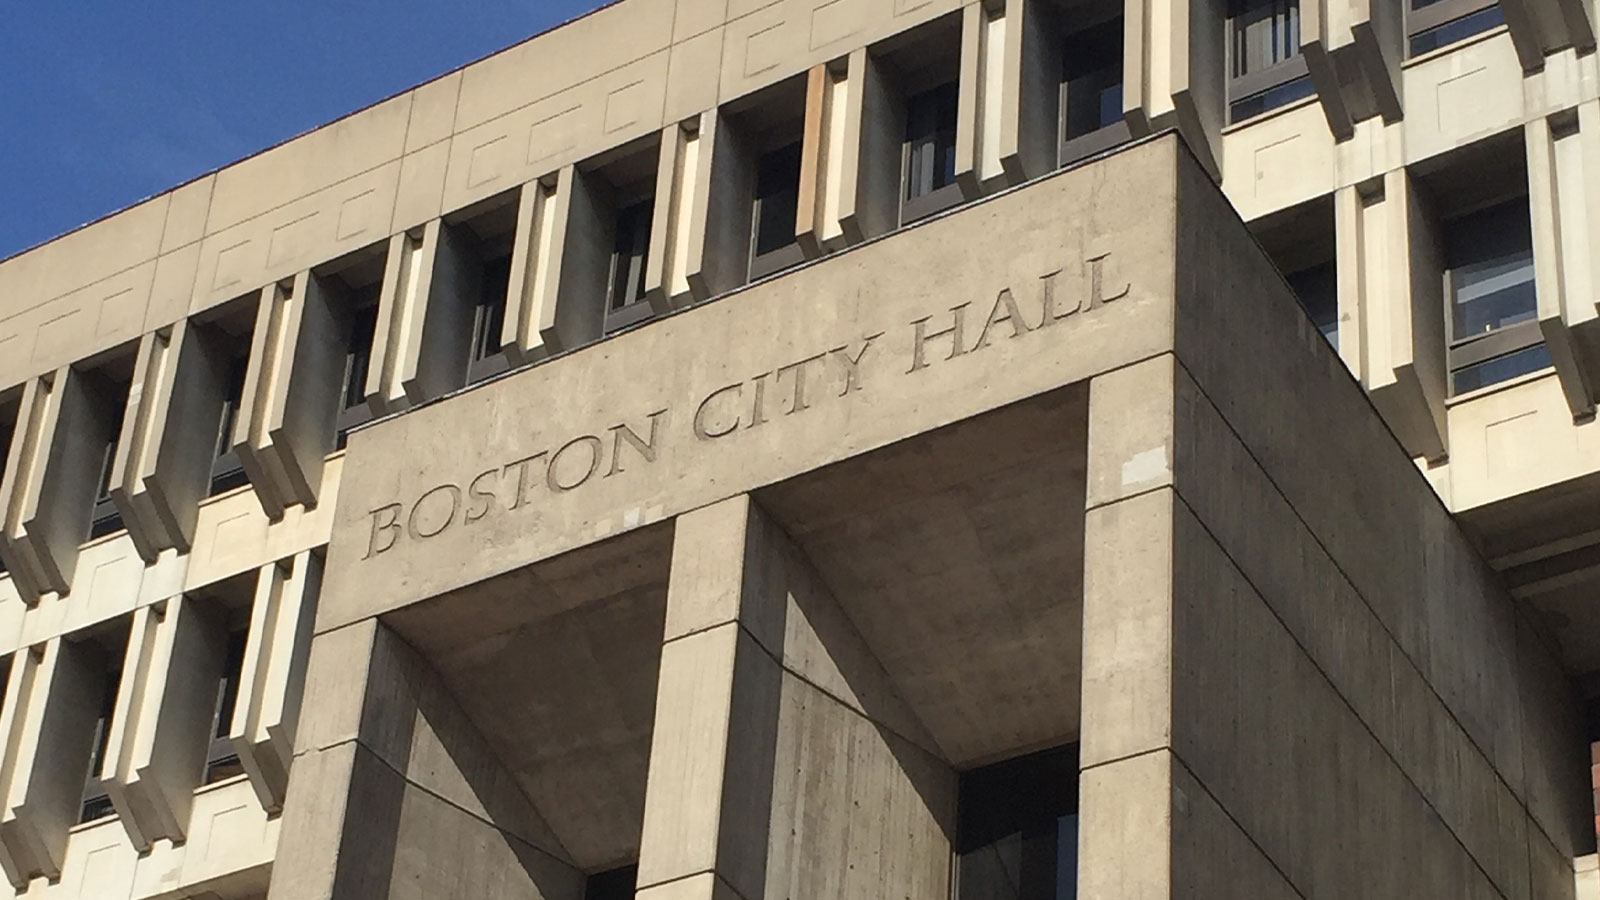 City Council votes to study reparations for Black Bostonians